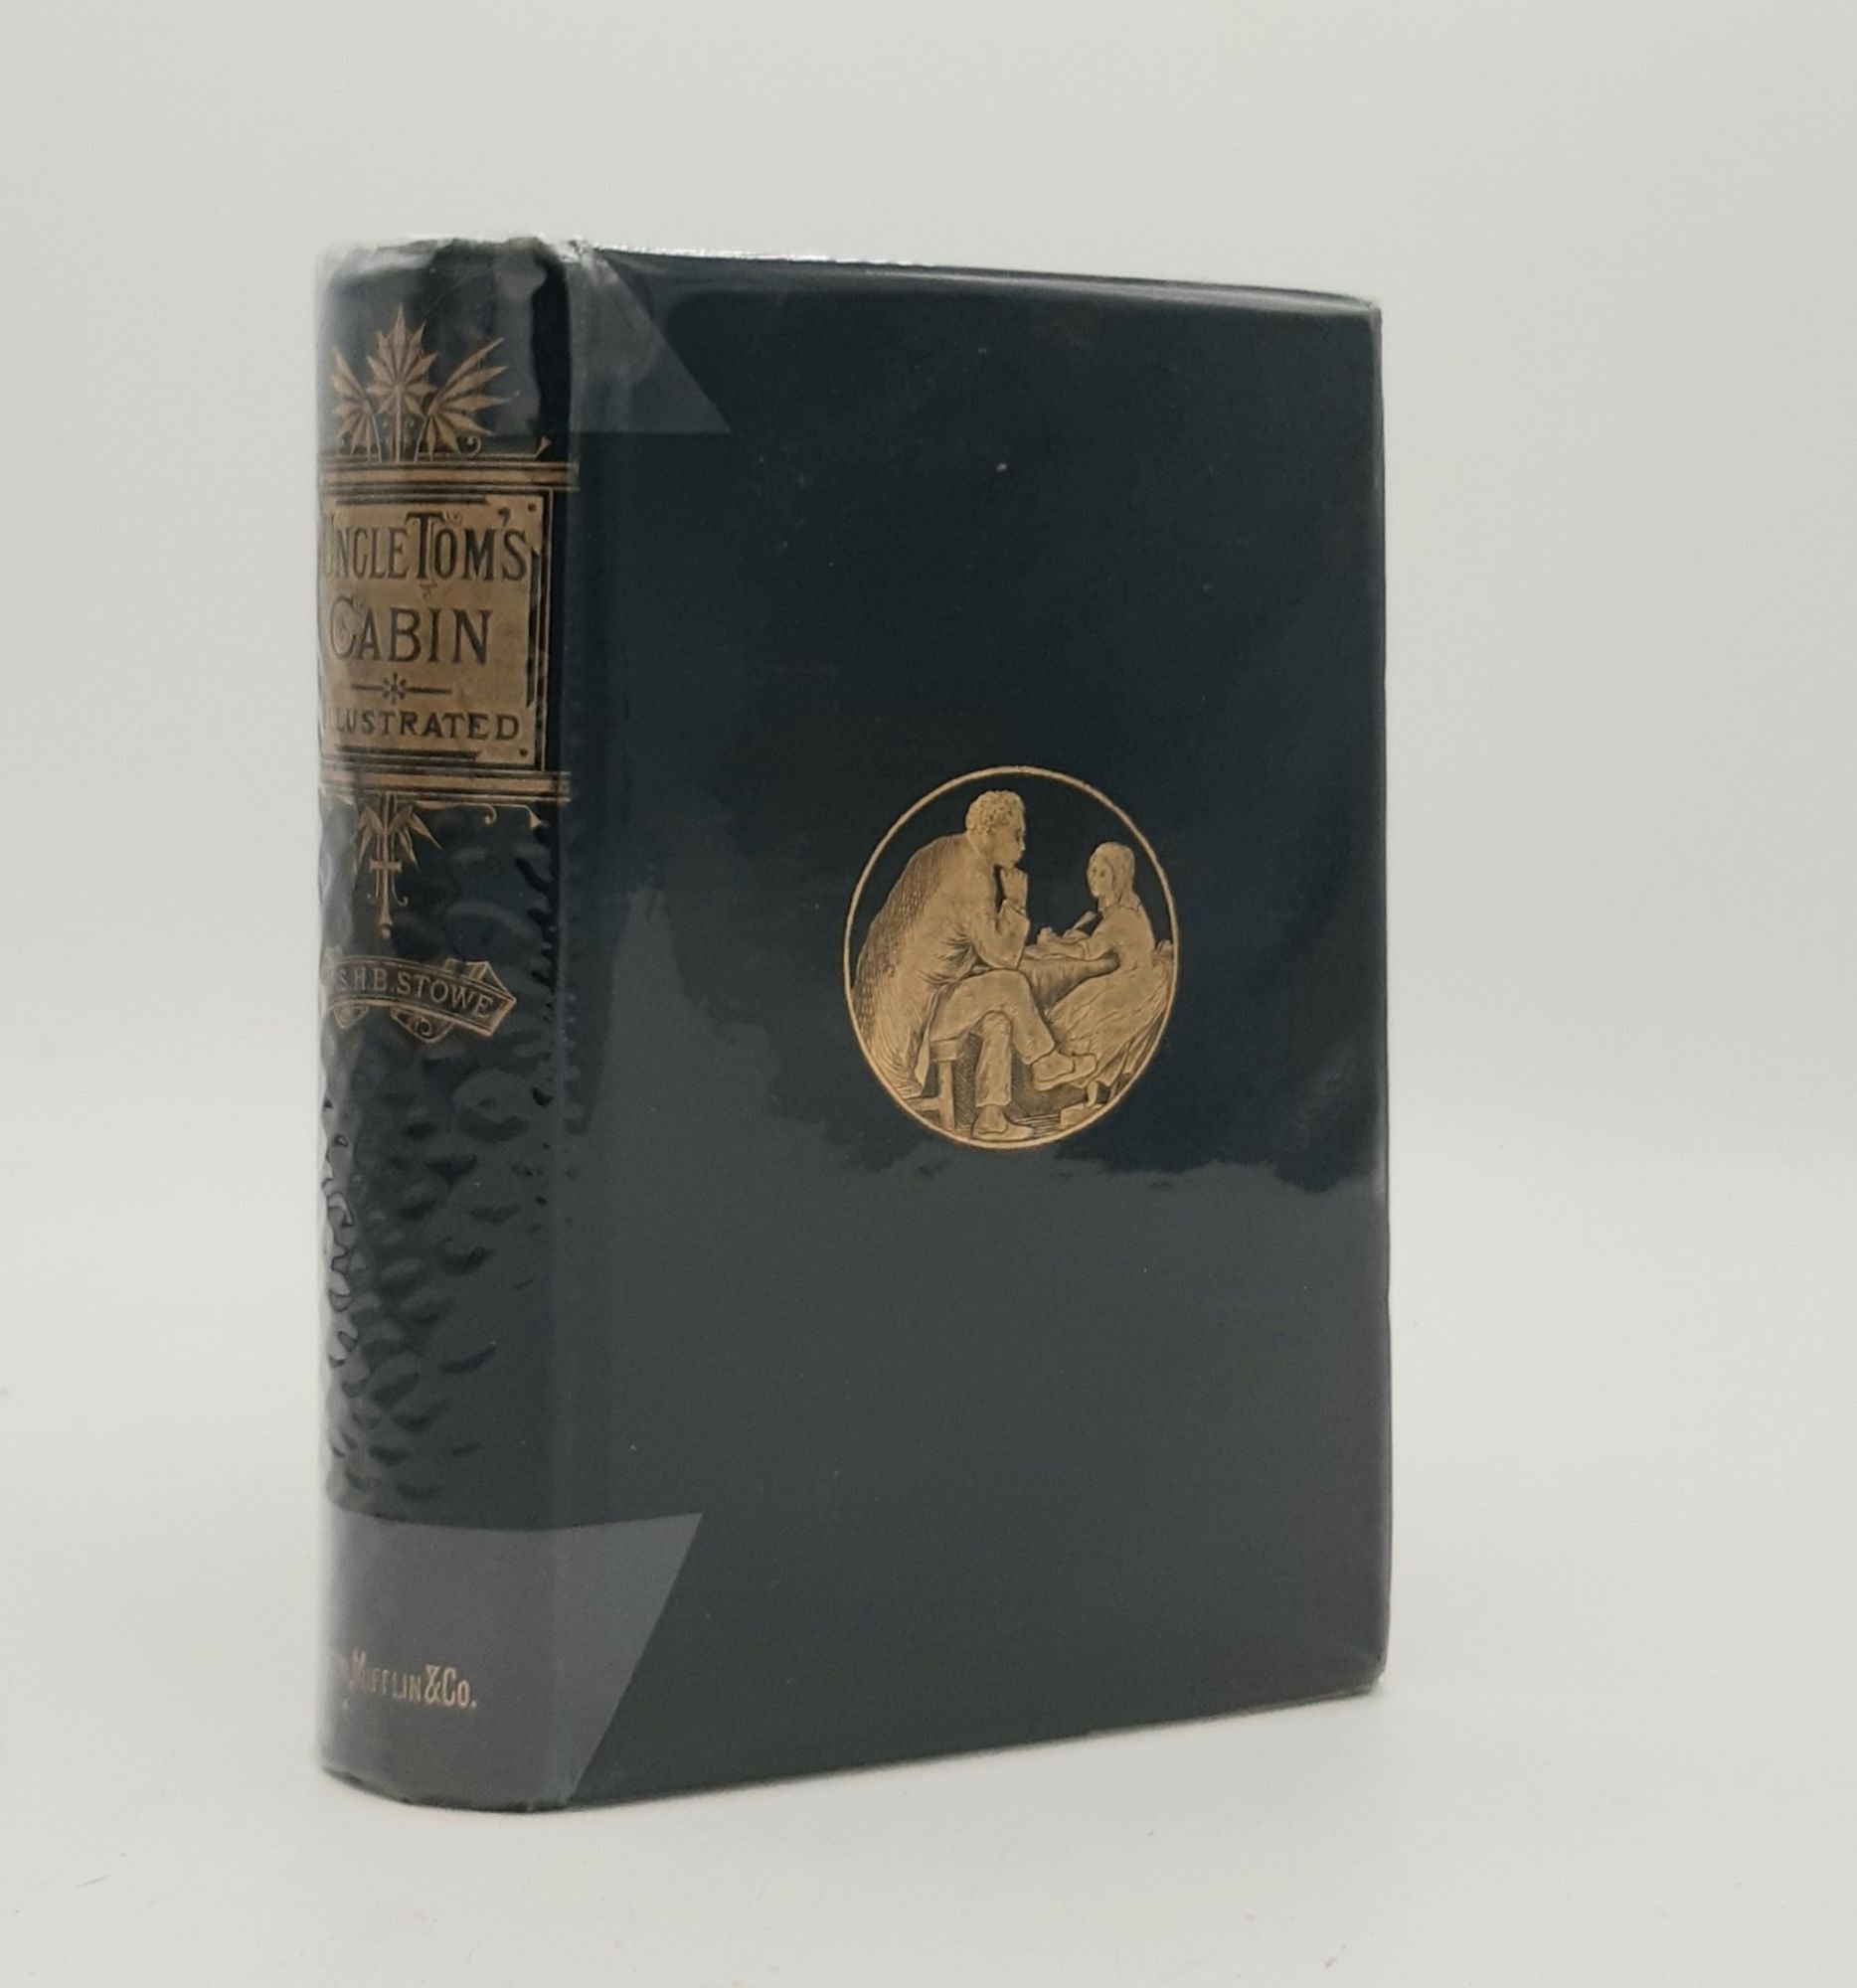 STOWE Harriet Beecher, BULLEN George - Uncle Tom's Cabin or Life Among the Lowly and a Bibliography of the Work Together with an Introductory Account of the Work.